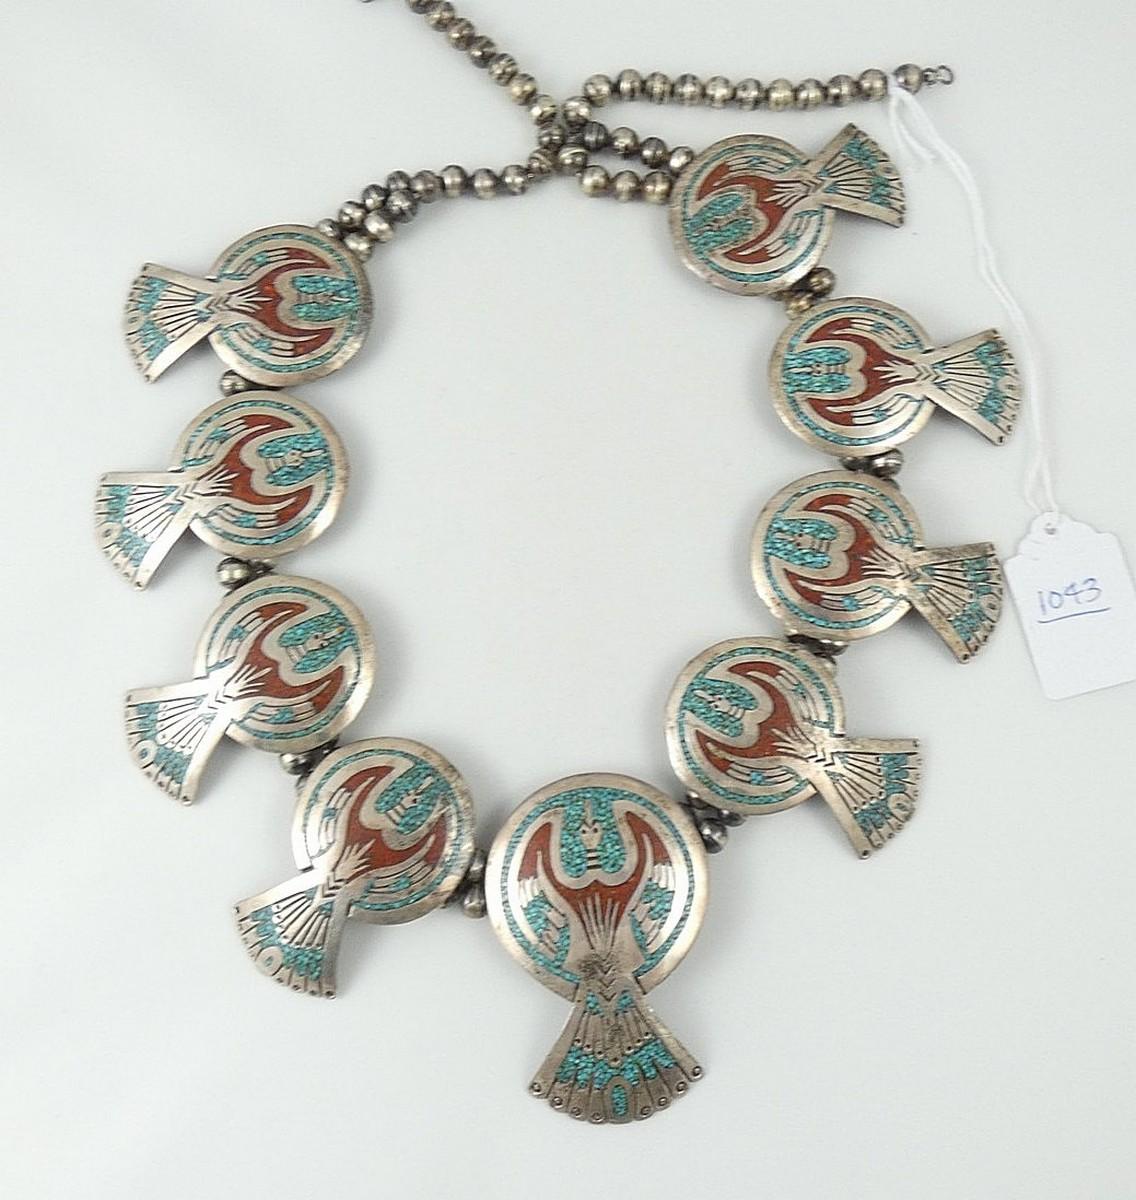 IMPRESSIVE HANDCRAFTED NECKLACE